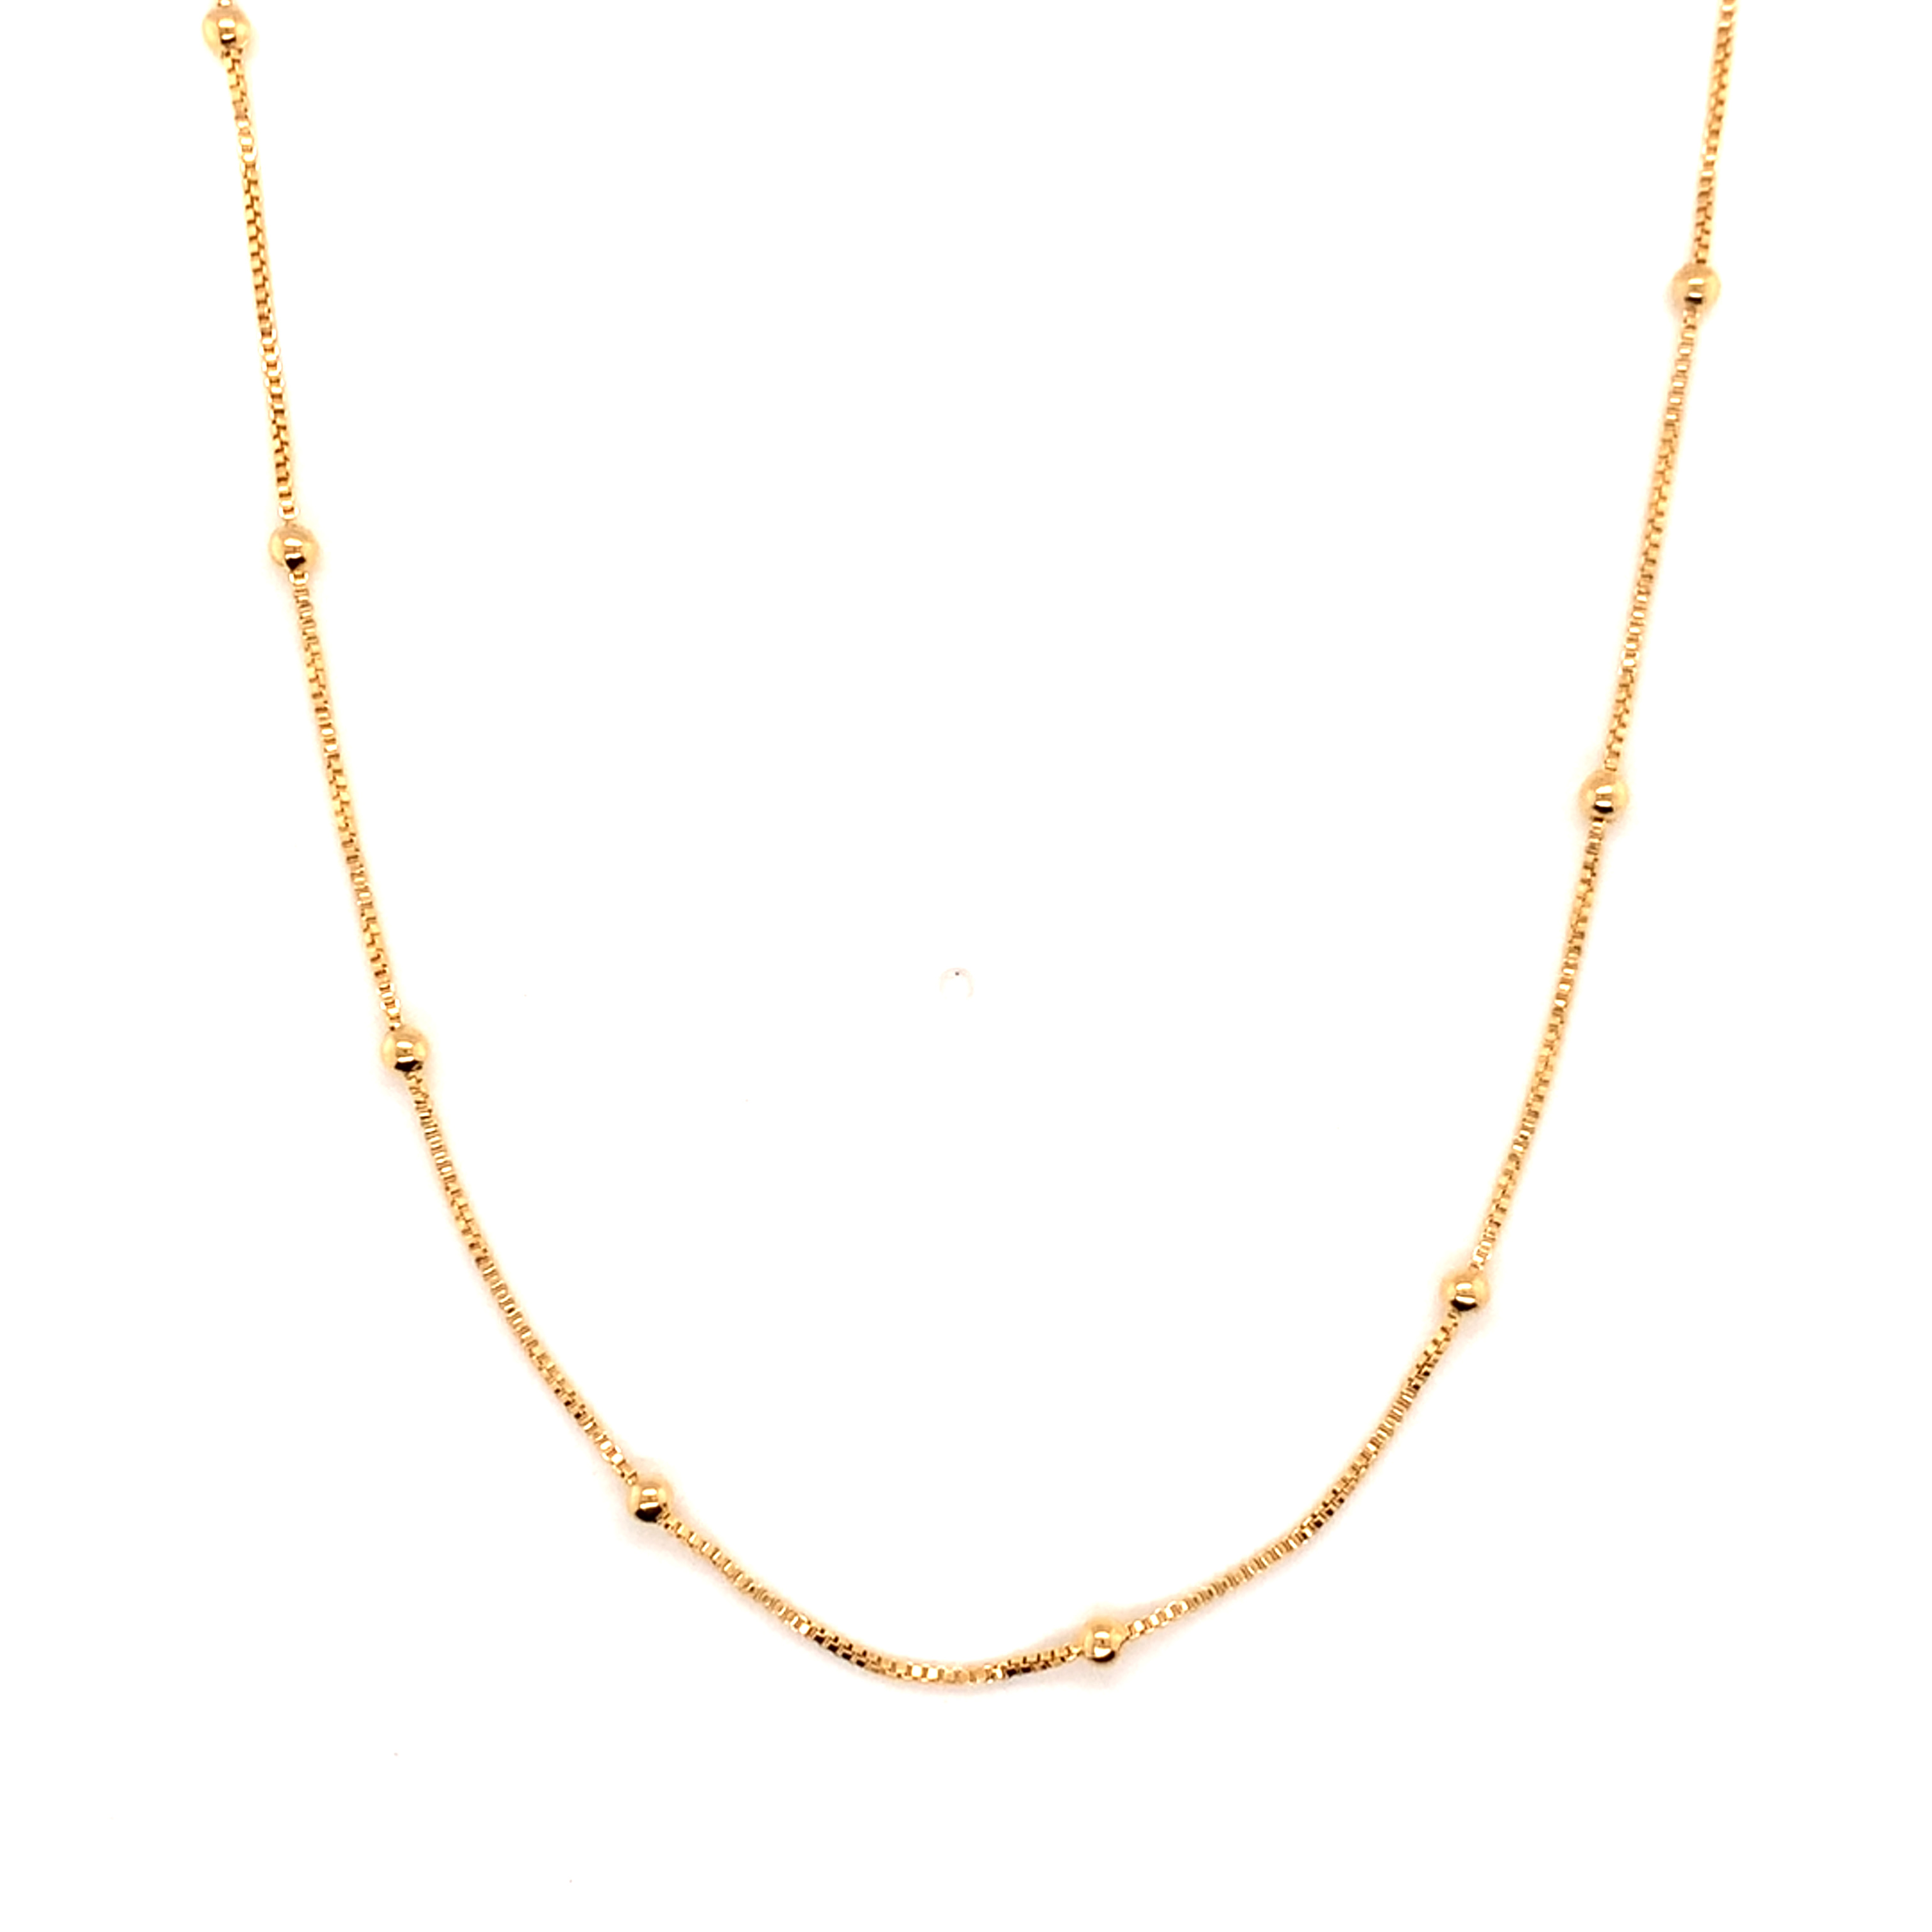 32" Box Chain with Ball Accent Belly Chain with 2" Extension - Gold Filled